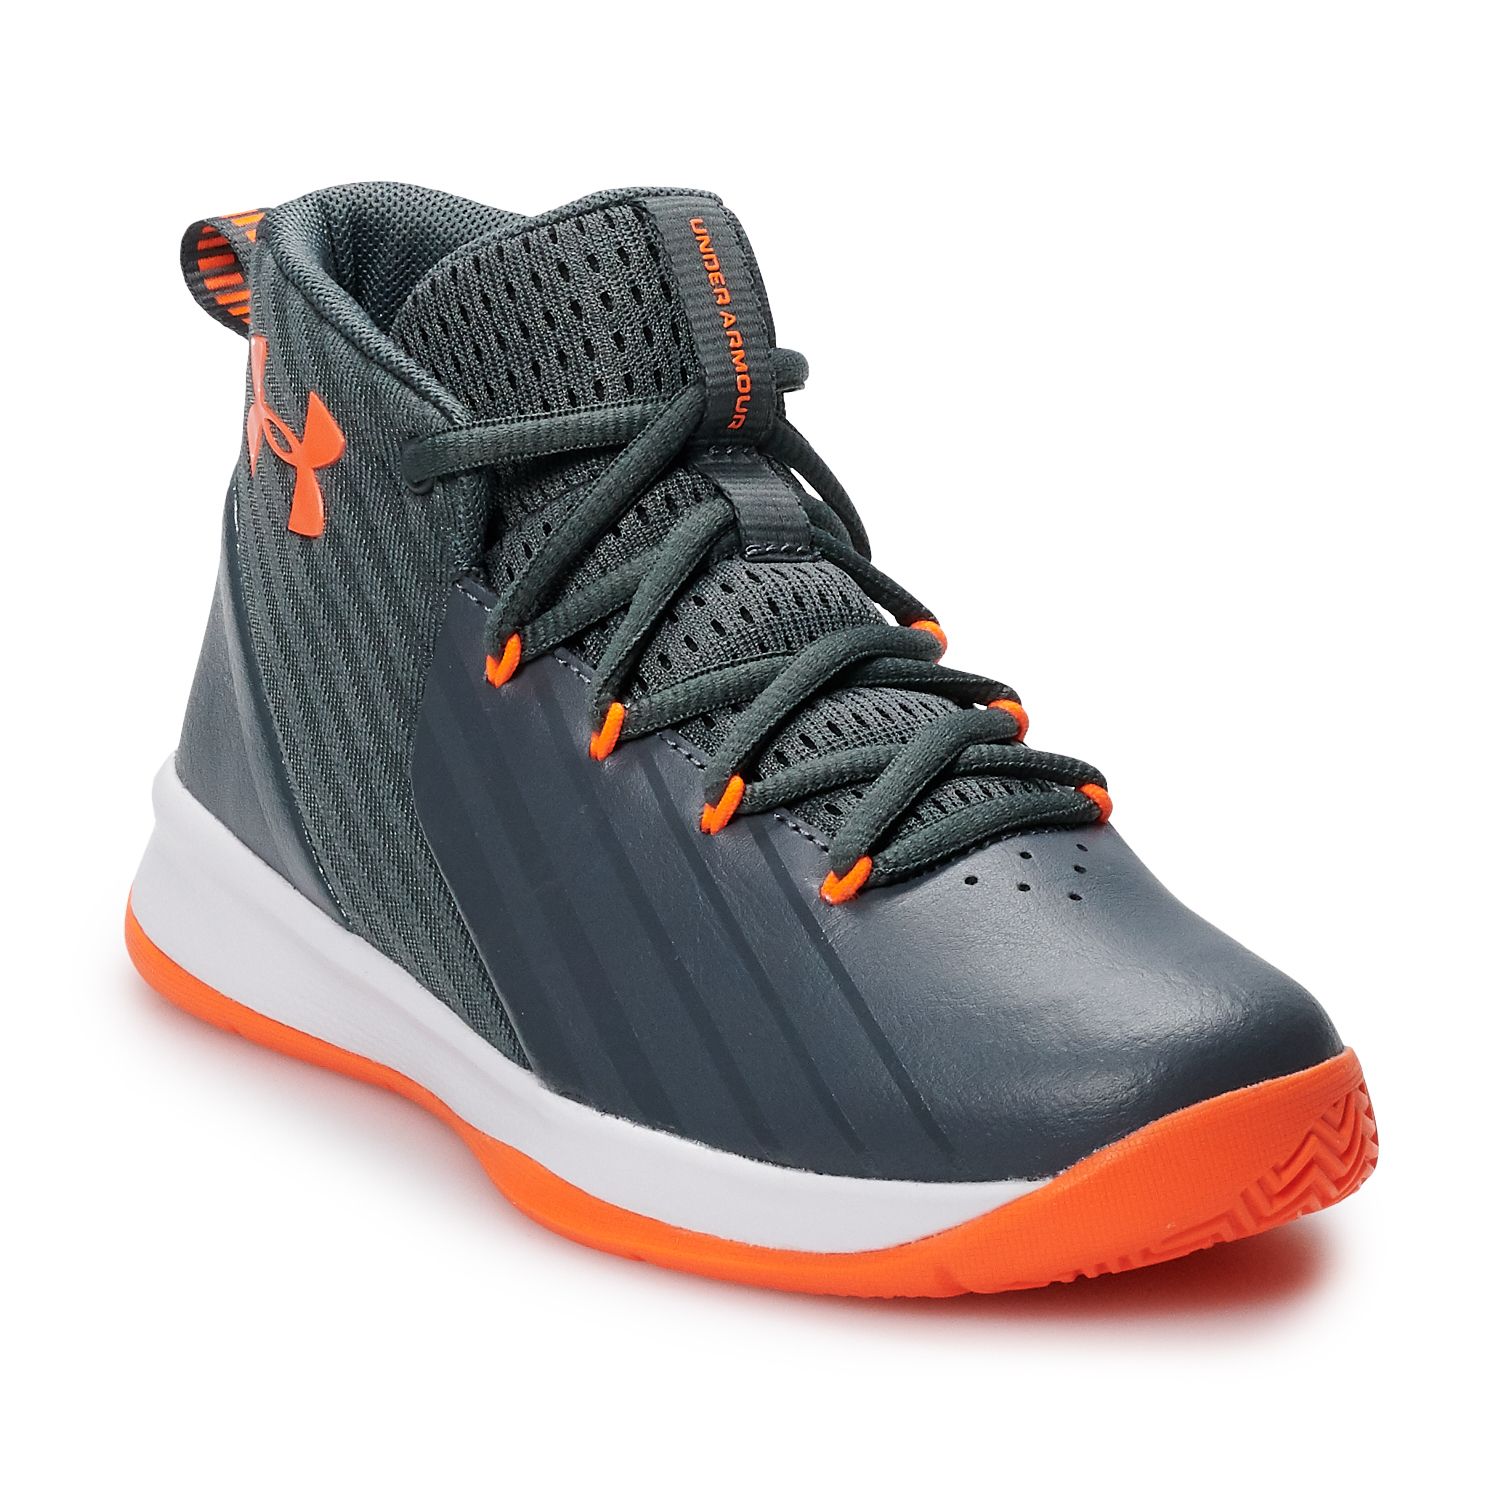 under armour lockdown 3 review